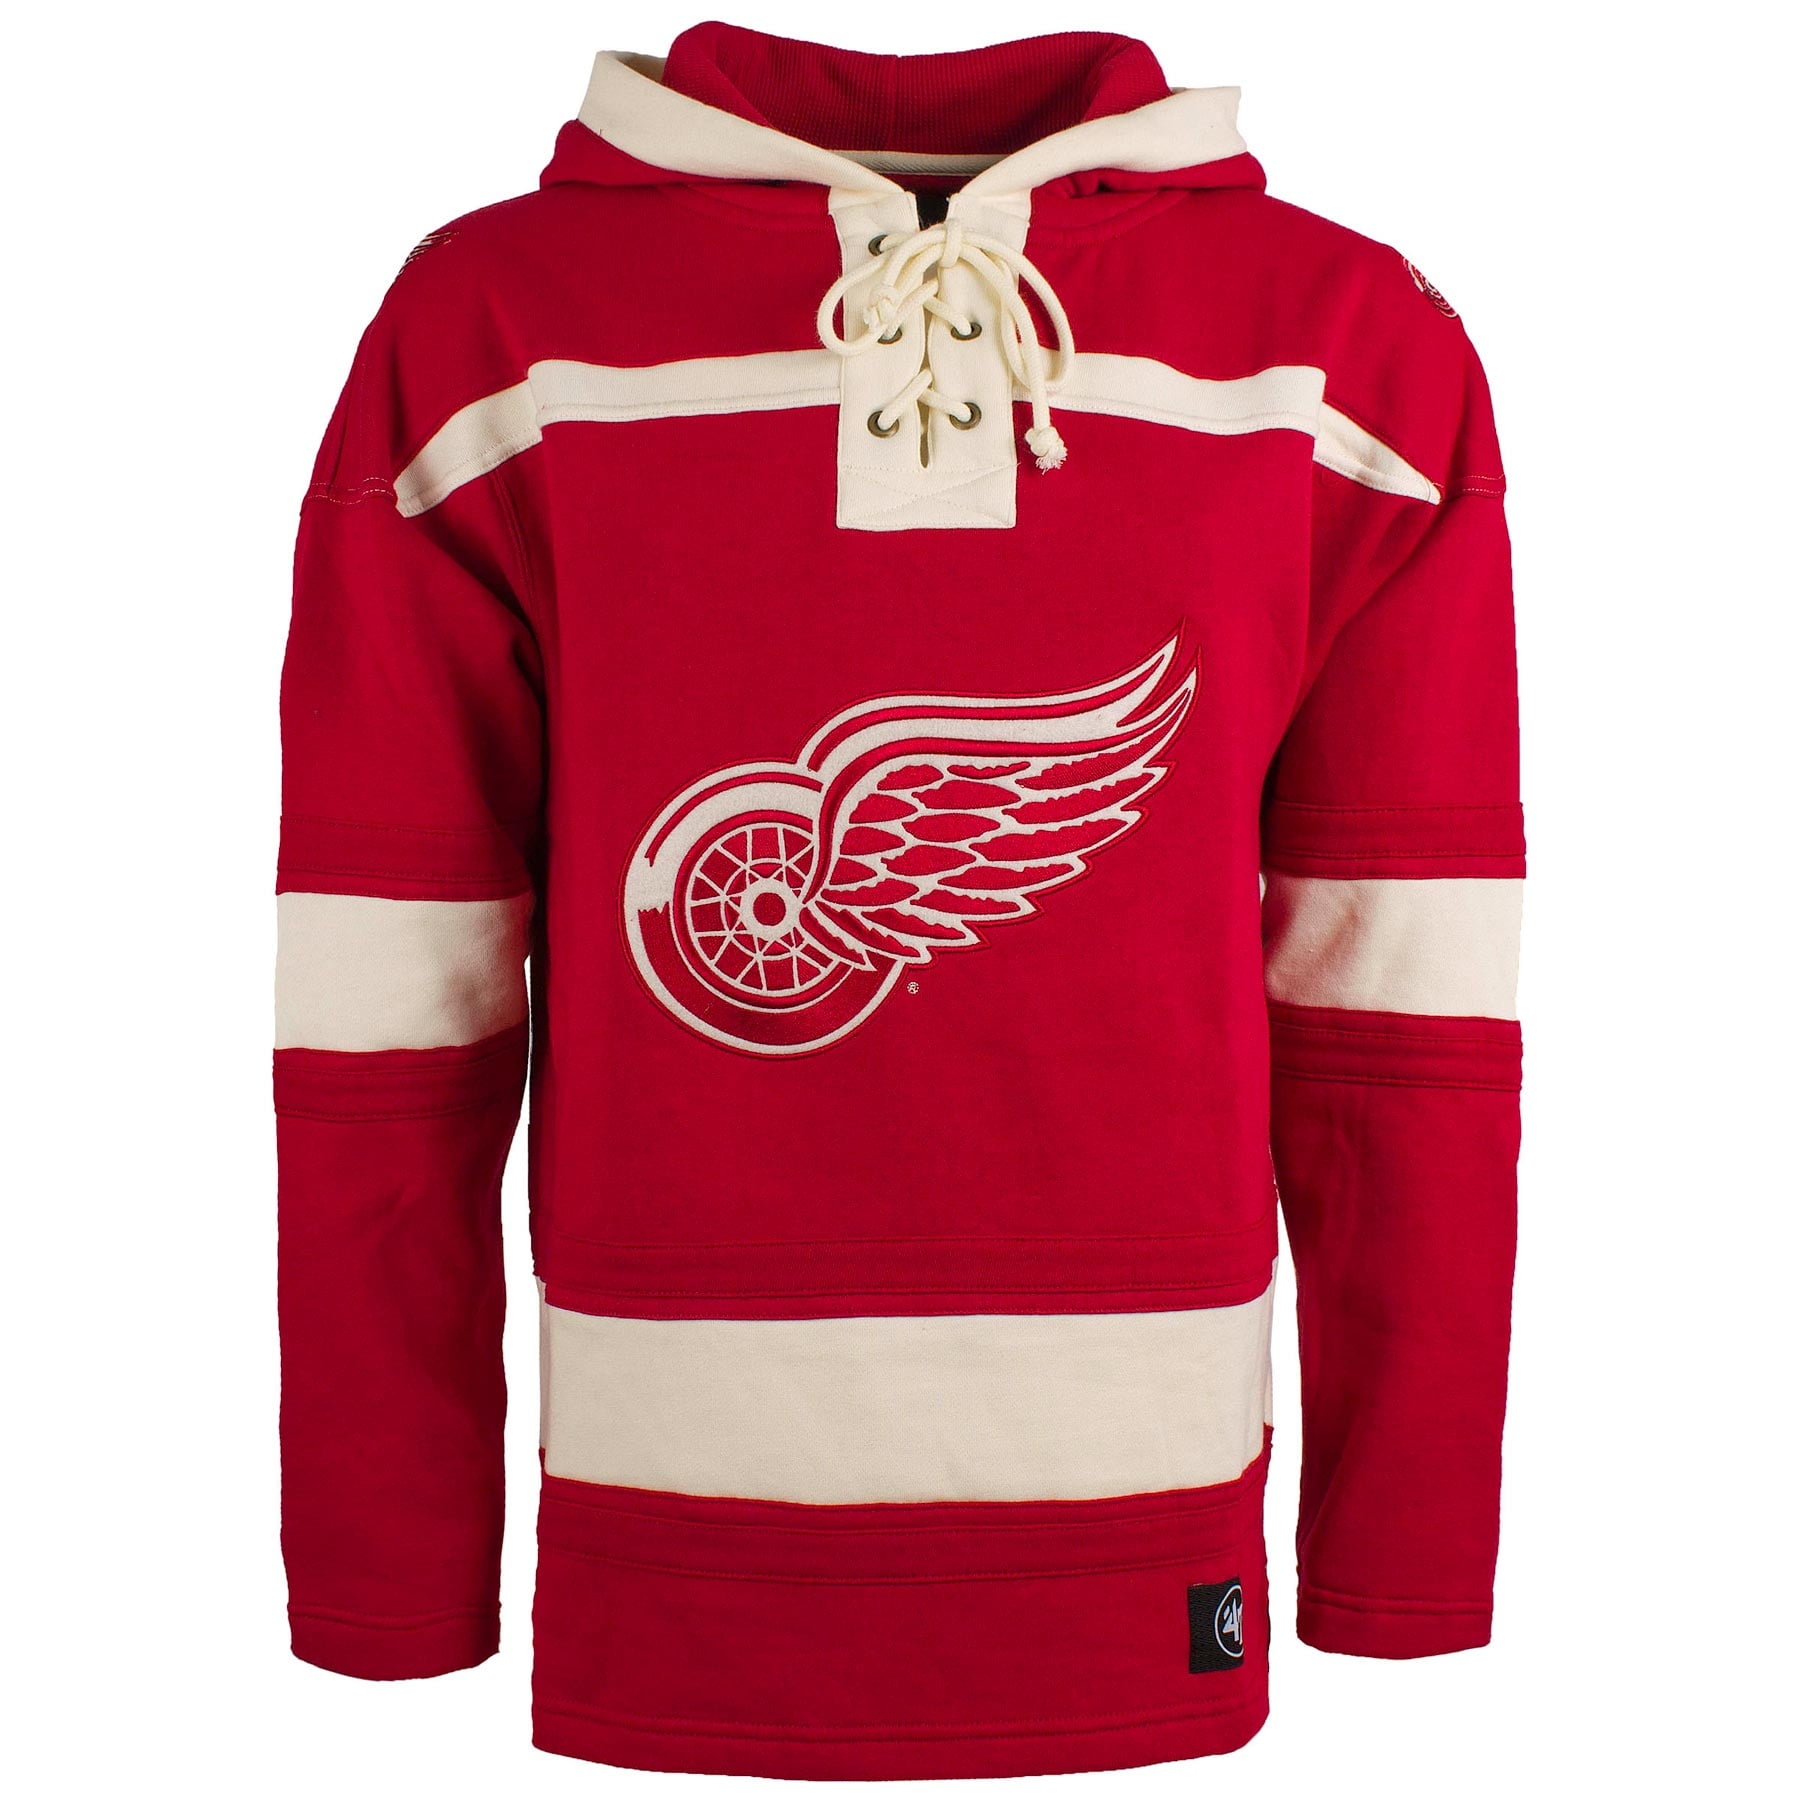 Heavyweight Jersey Lacer Hoodie 